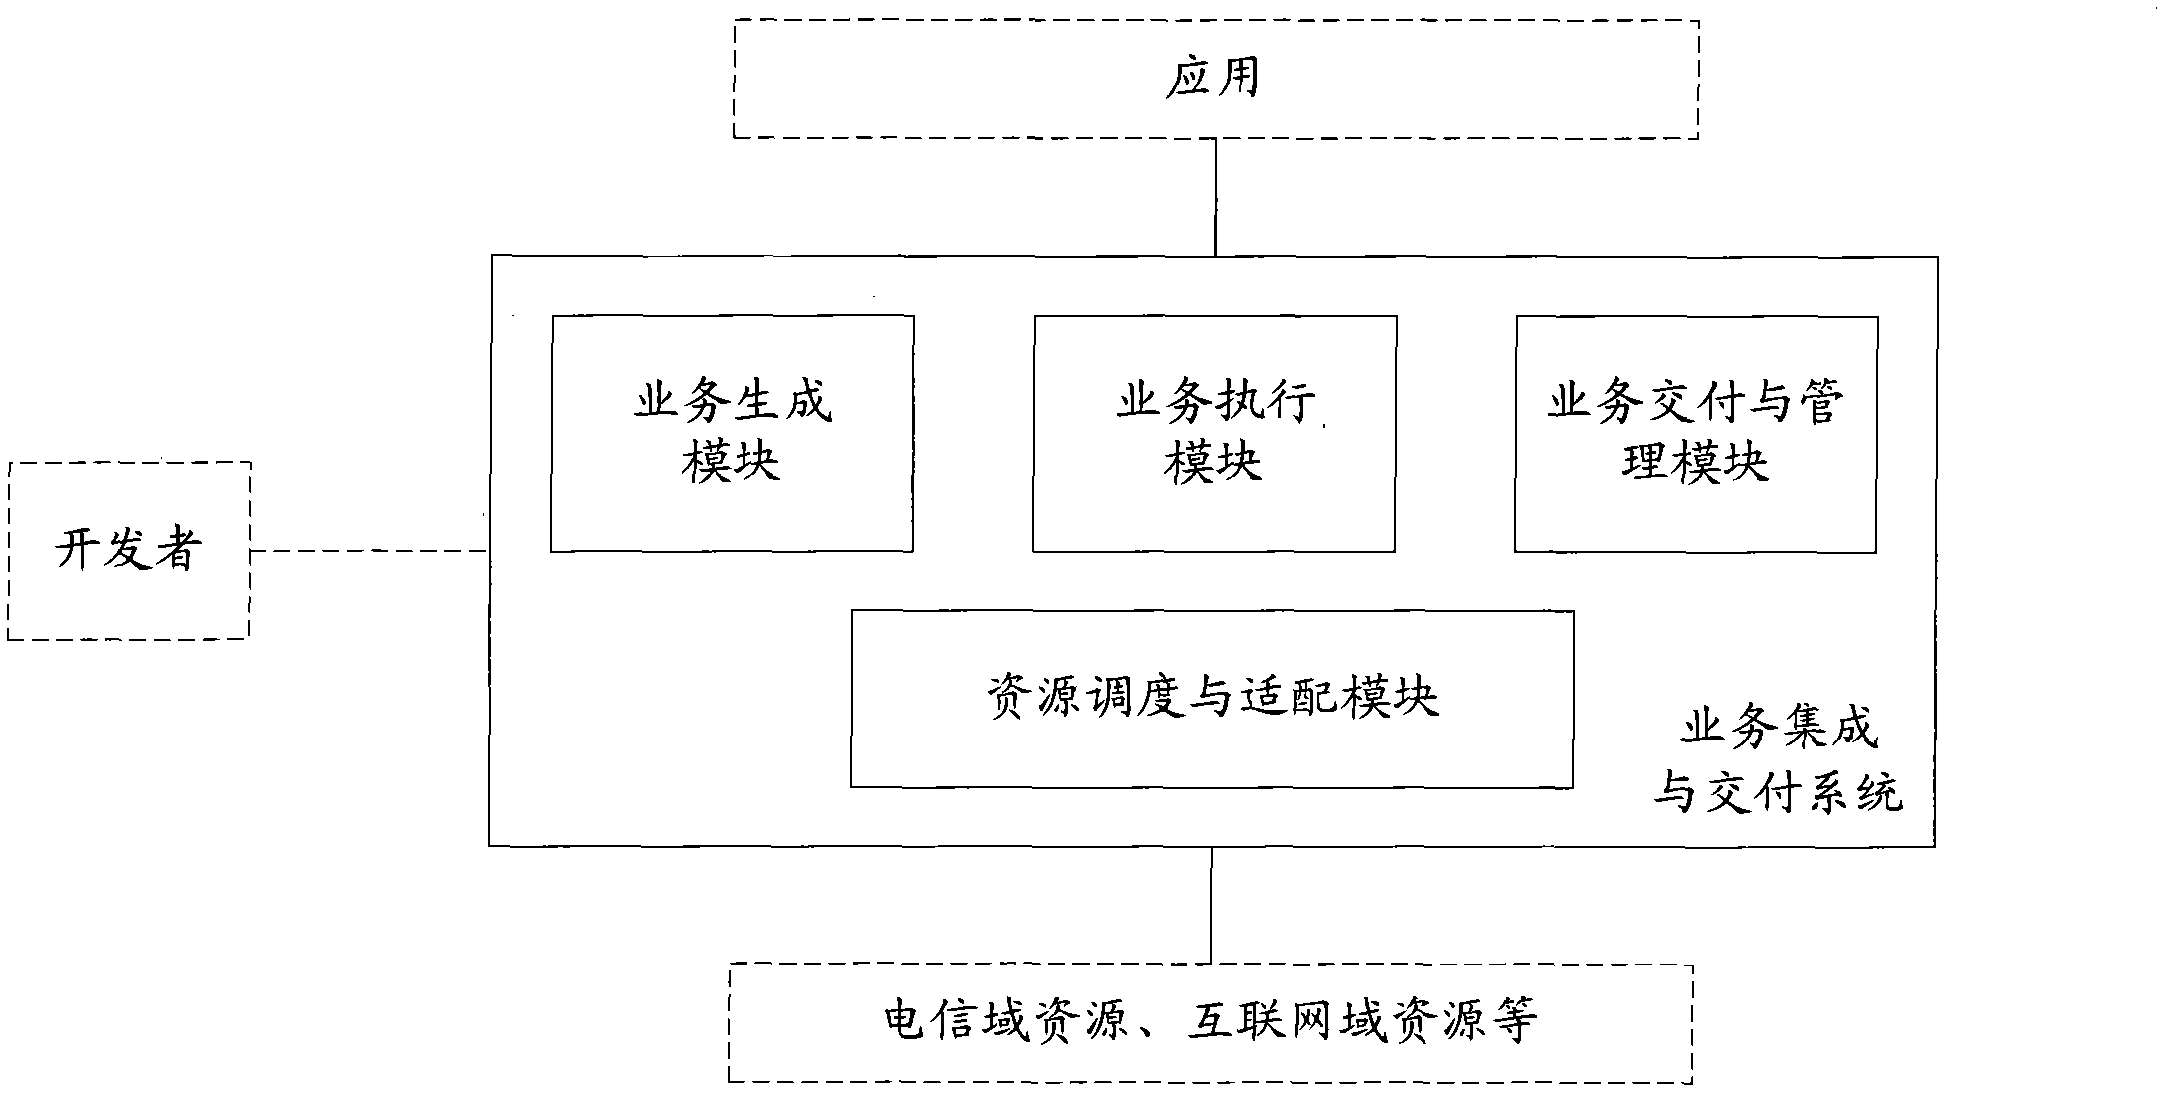 Business integration and delivery system and method